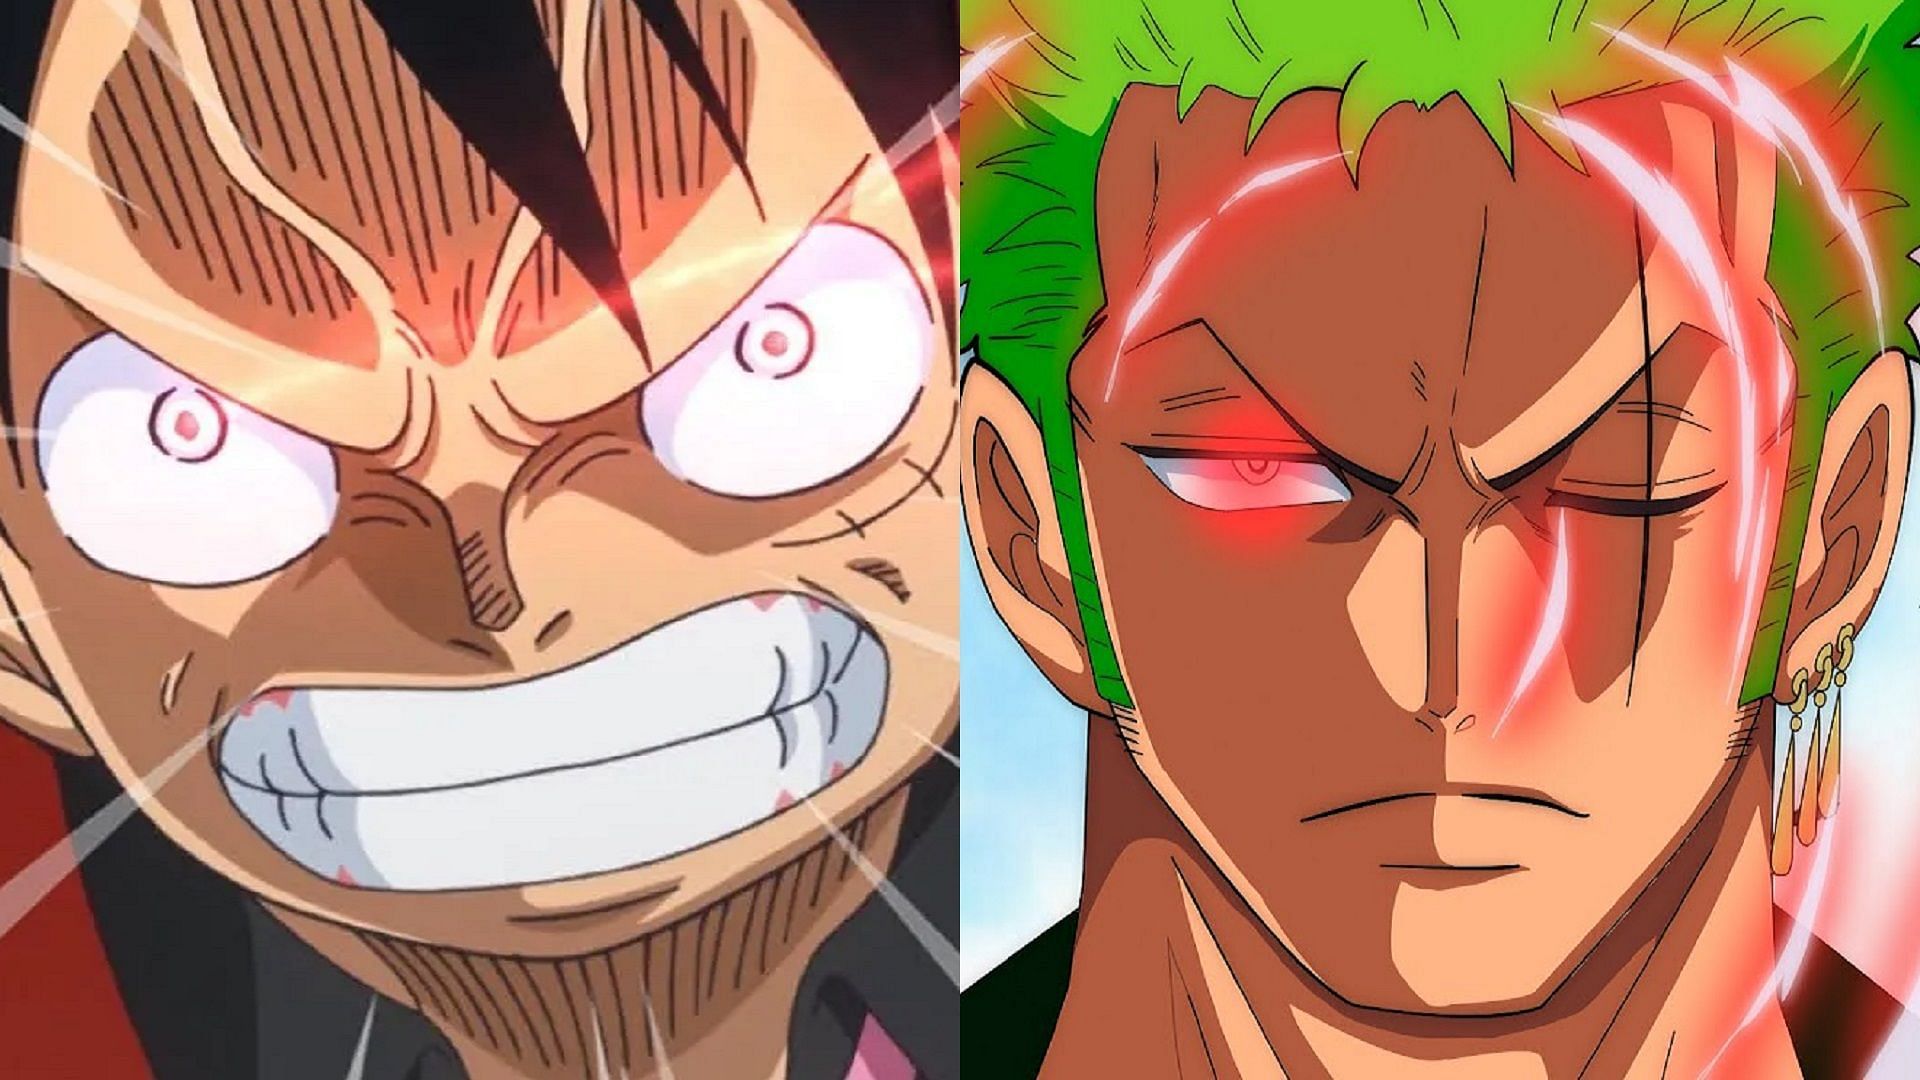 Within the Strawhats, only Luffy and Zoro possess the very rare Color of the Supreme King (Image via Eiichiro Oda/Shueisha, One Piece)